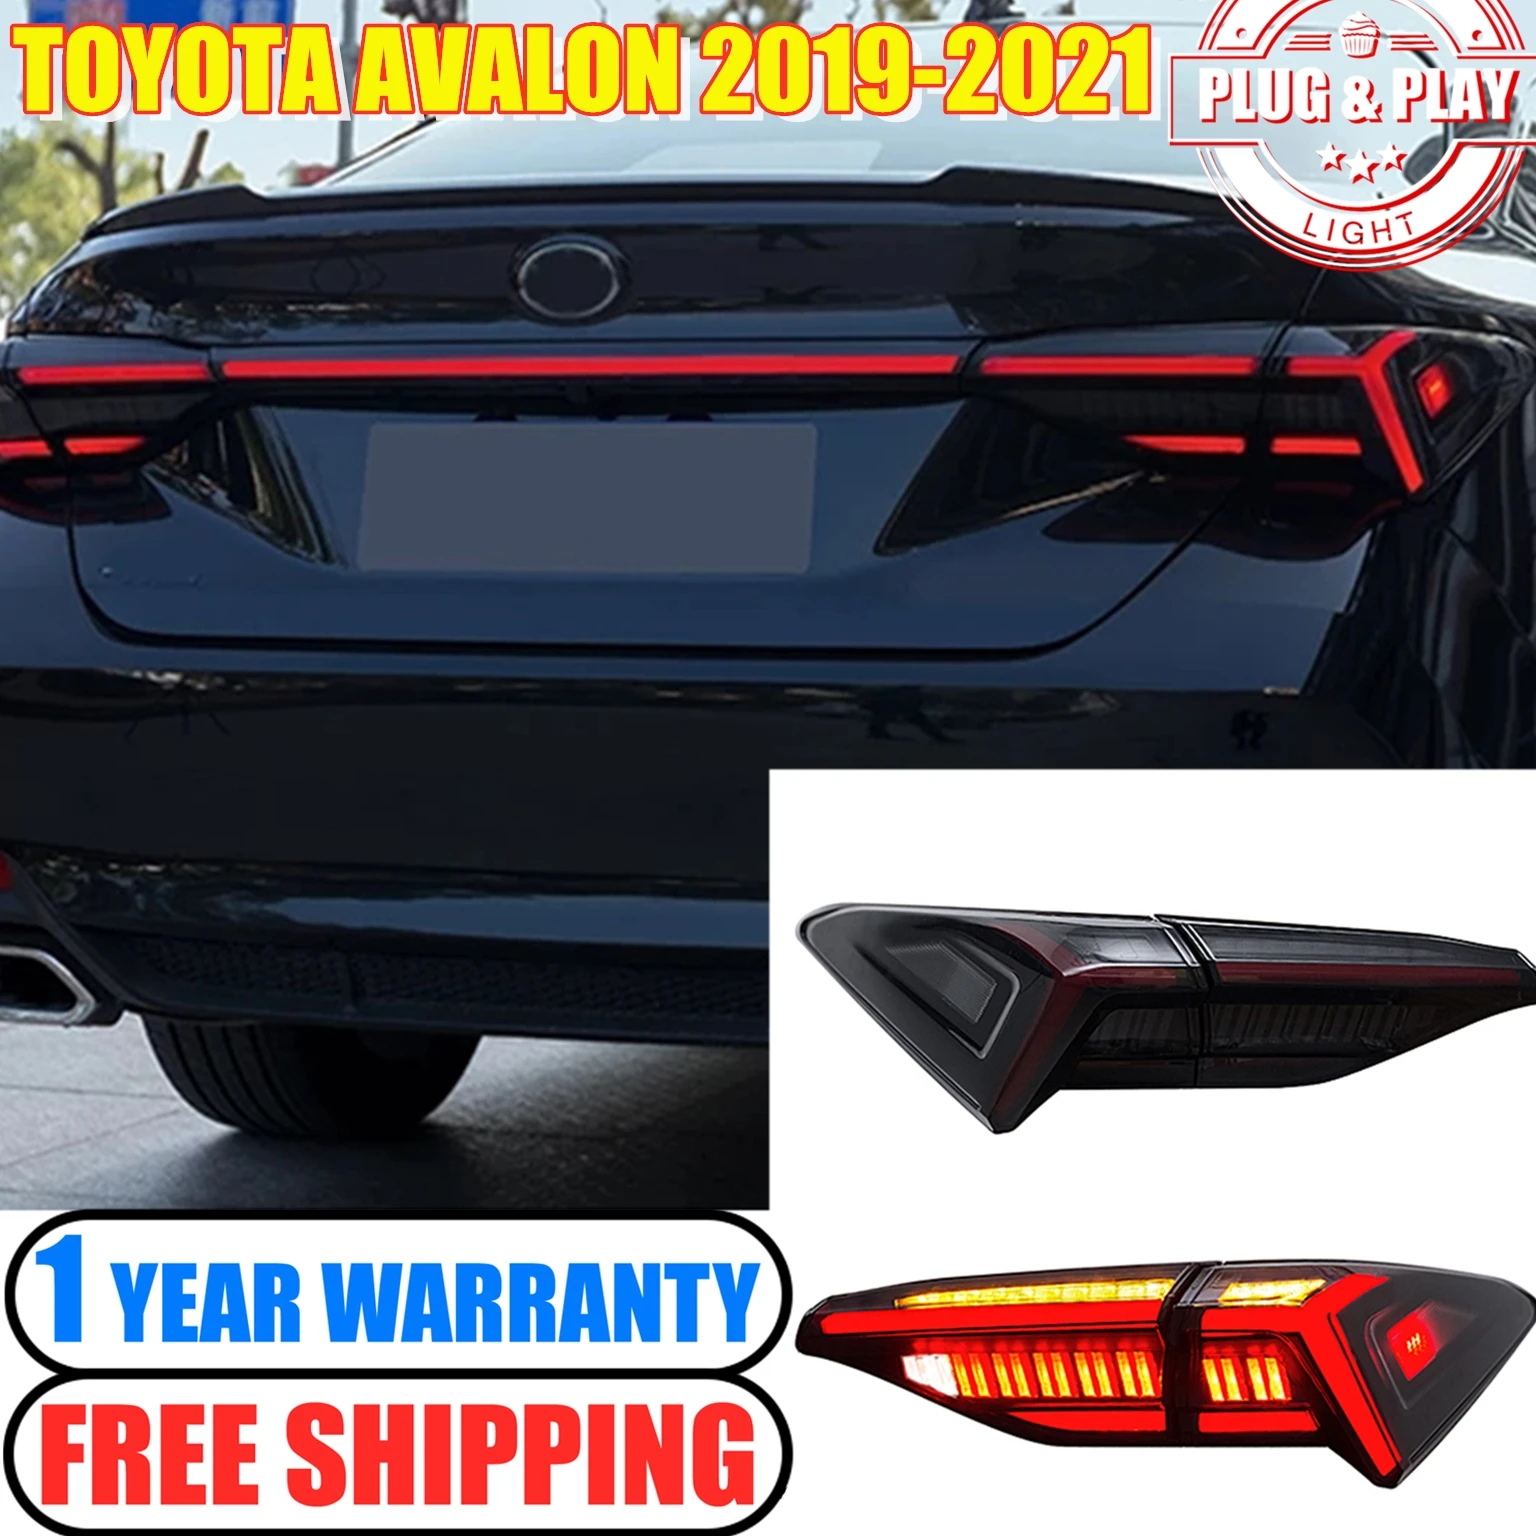 

Rear lamp for 2018 to 2020 Toyota Avalon Tail Lights Assembly LED Taillight Dynamic Sequential Turn Signals Rear DRL Brake Lamps